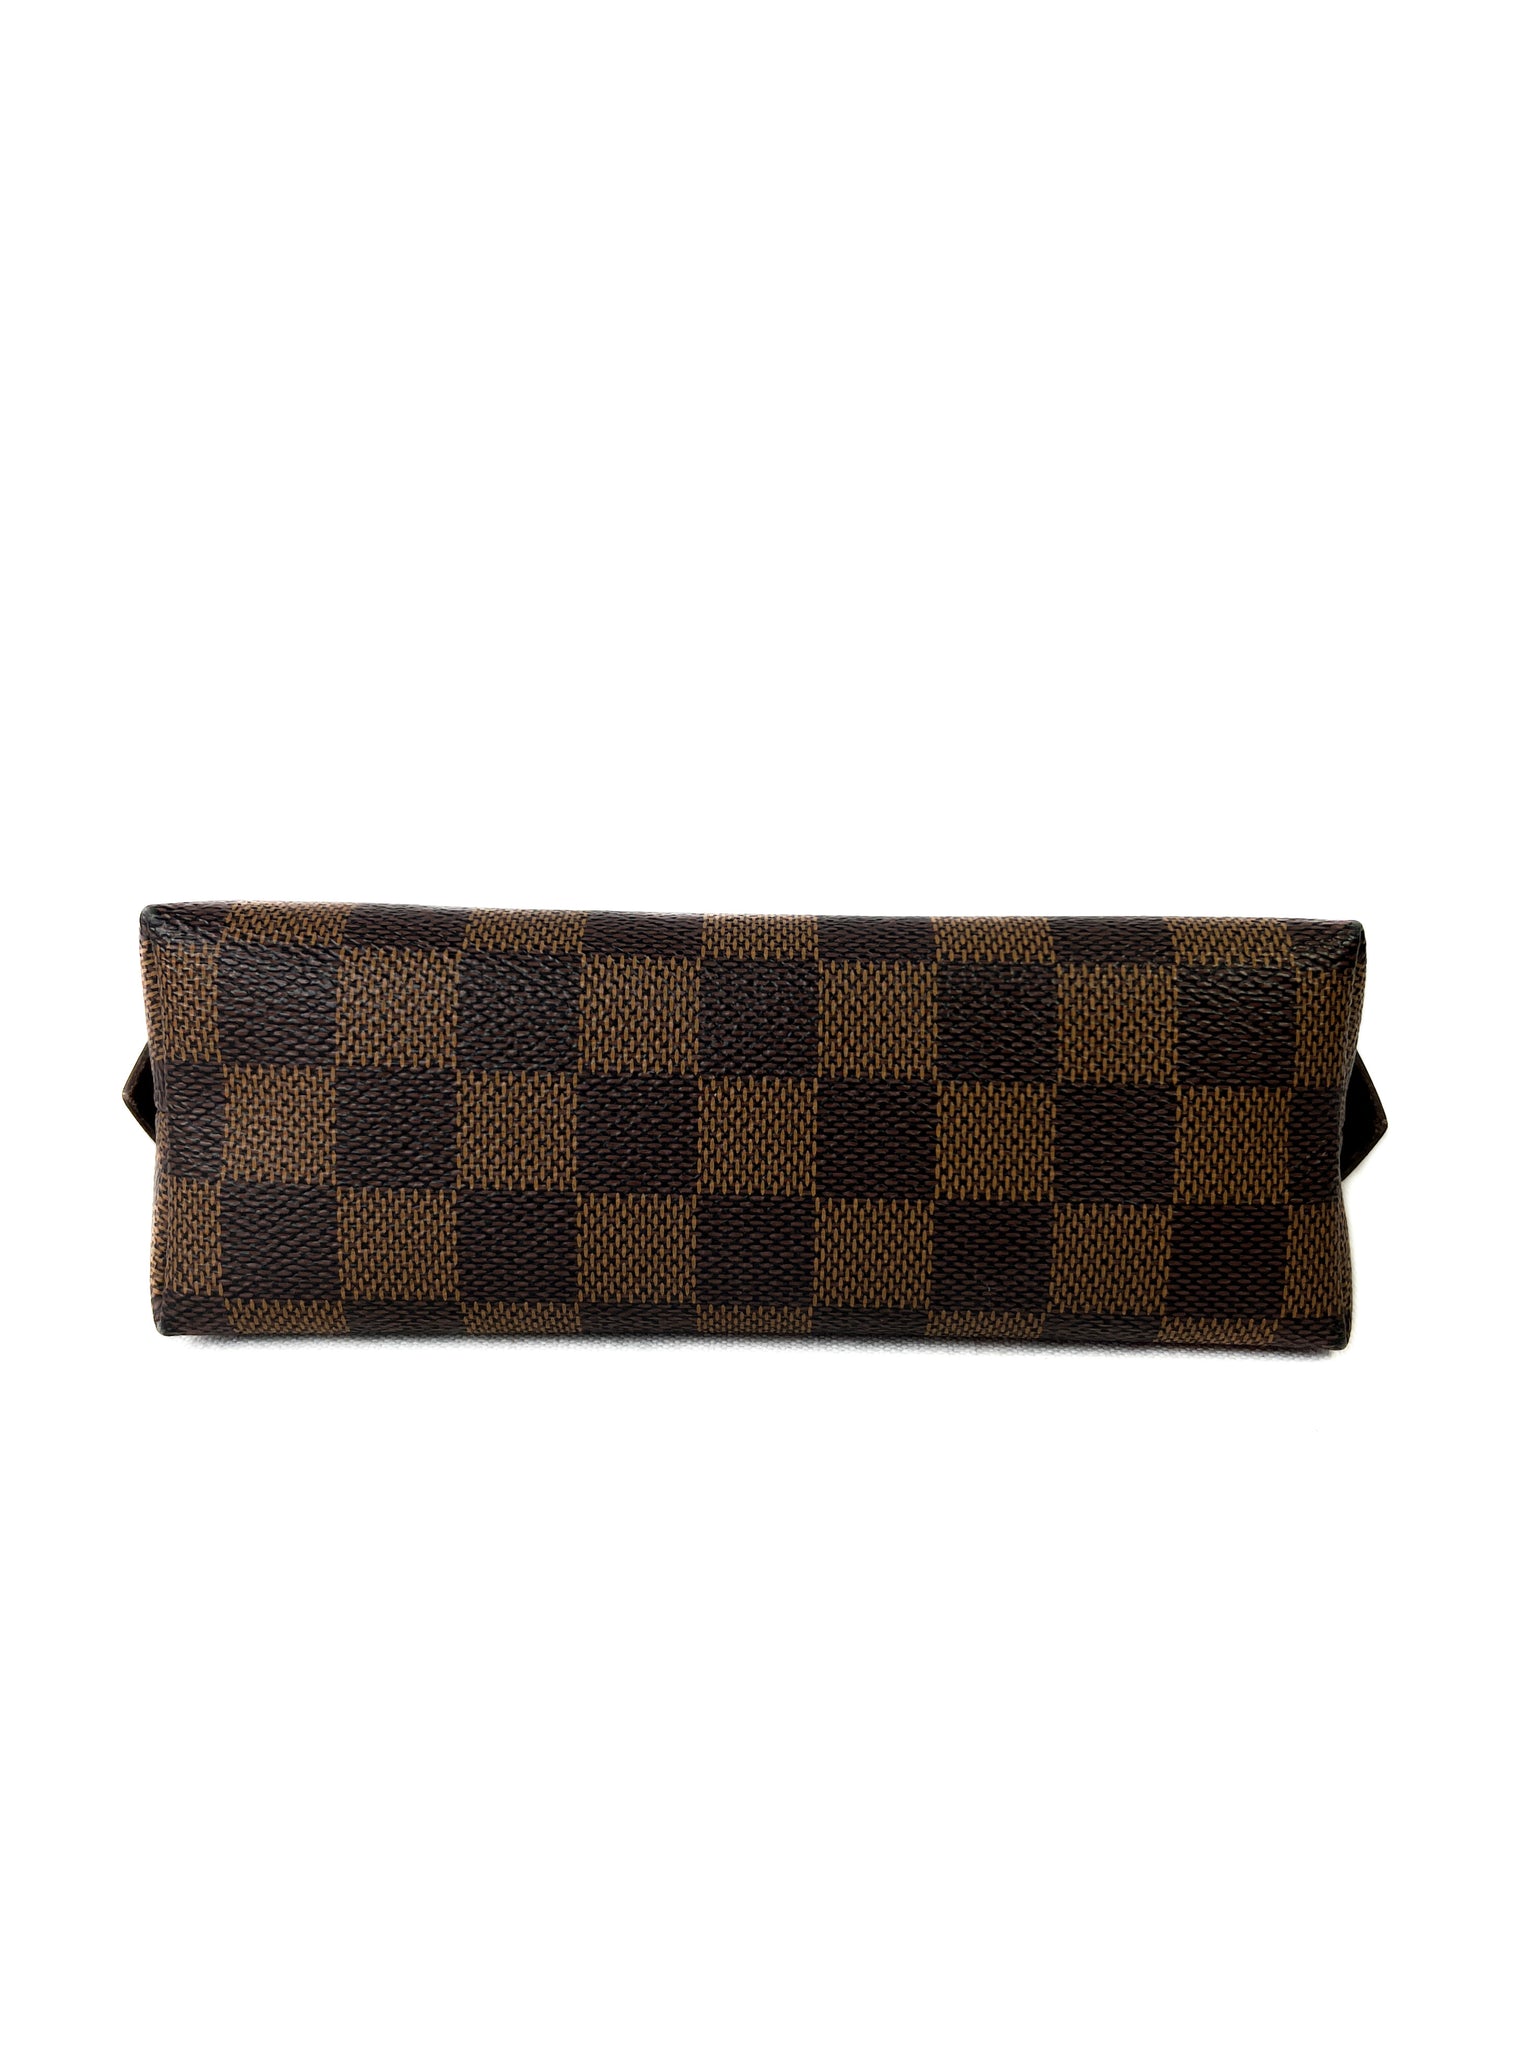 Damier Graphite Coated Canvas Toiletry Pouch